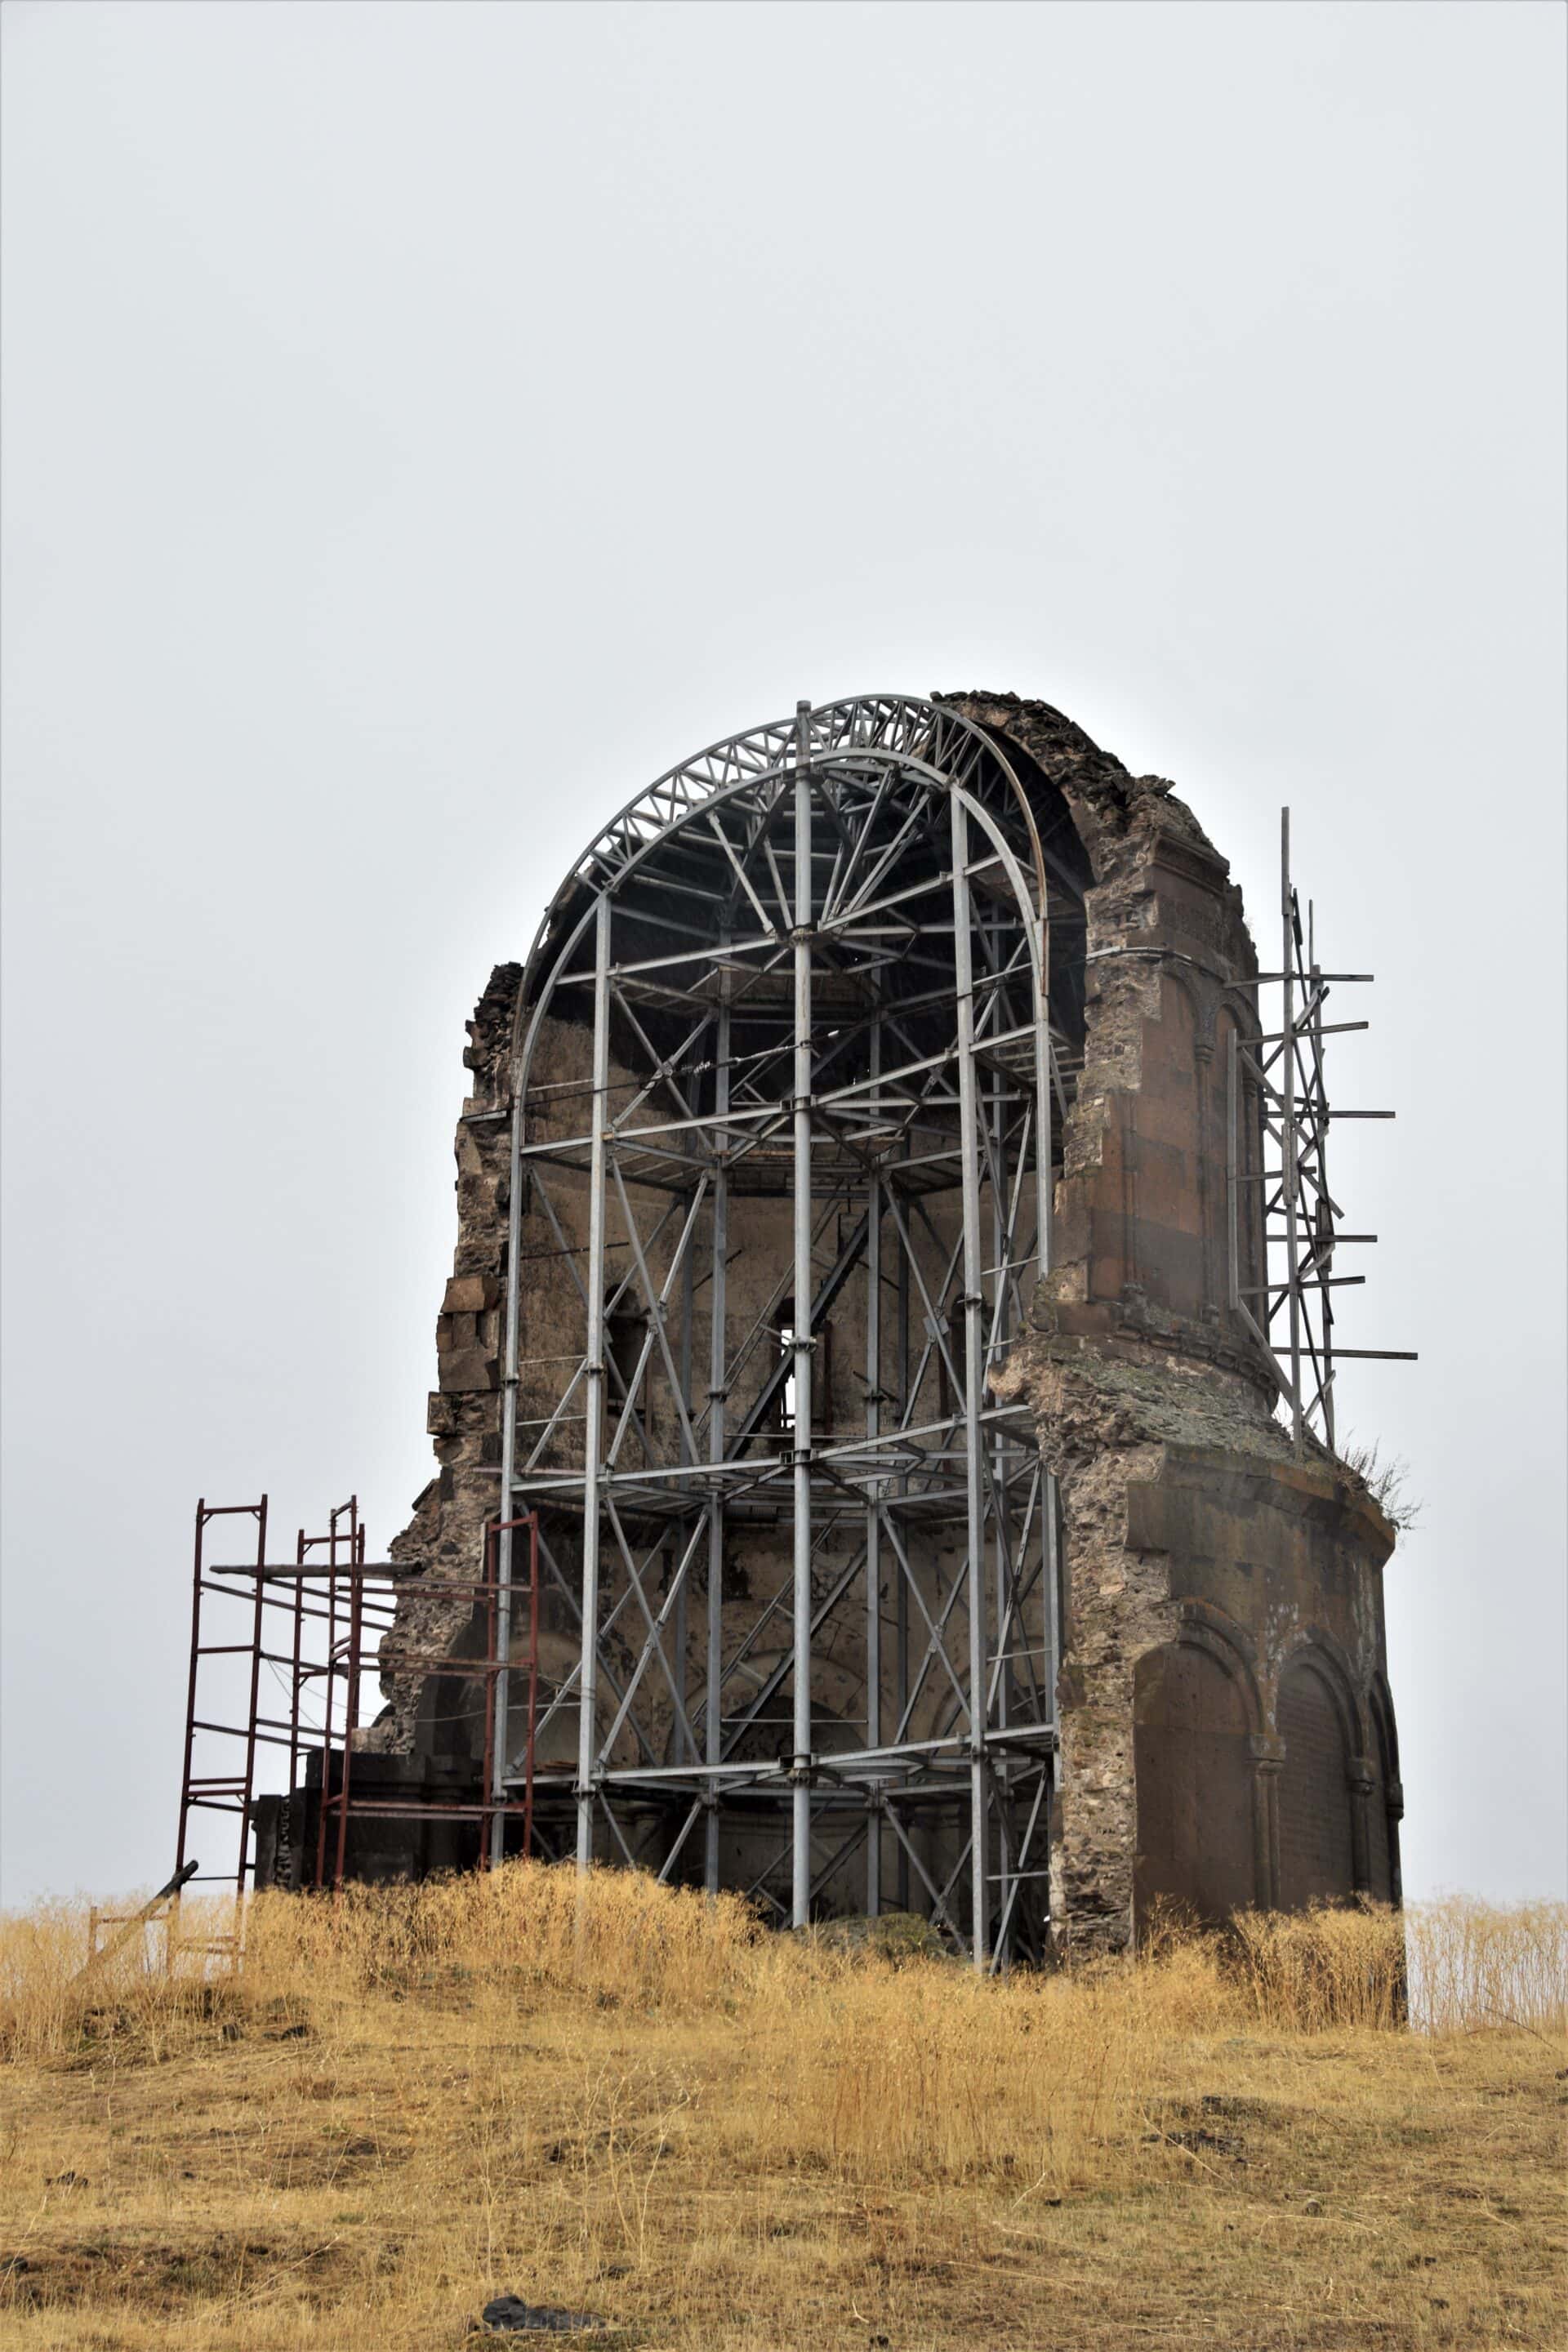 the remaining half of an Armenian church held up by scafolding